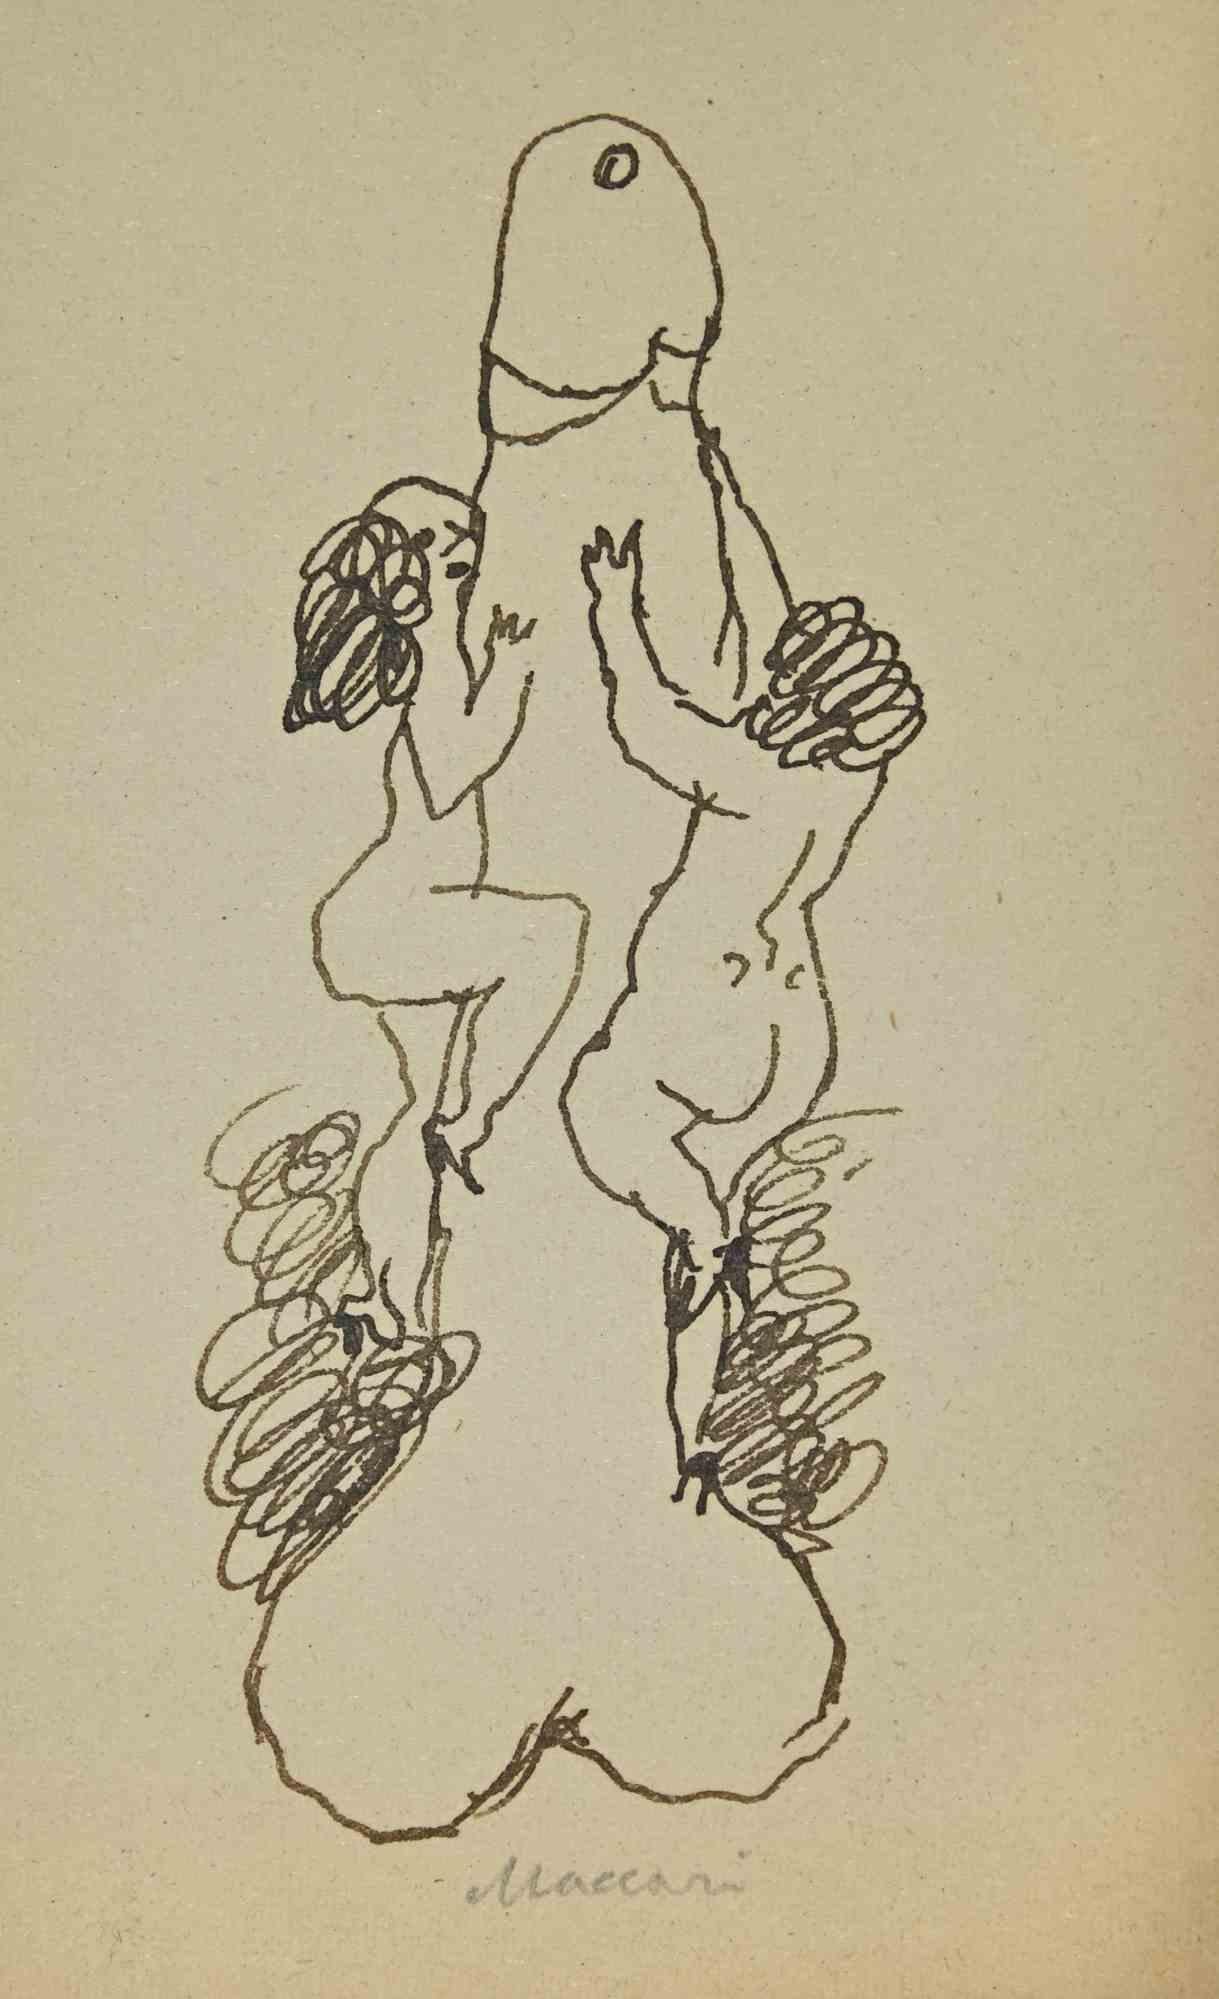 The Climbers is an Artwork realized by Mino Maccari  (1924-1989) in 1940 ca.

Drawing pen on yellowed paper. Hand Signed on the lower margin.

Good conditions.

Mino Maccari (Siena, 1924-Rome, June 16, 1989) was an Italian writer, painter, engraver